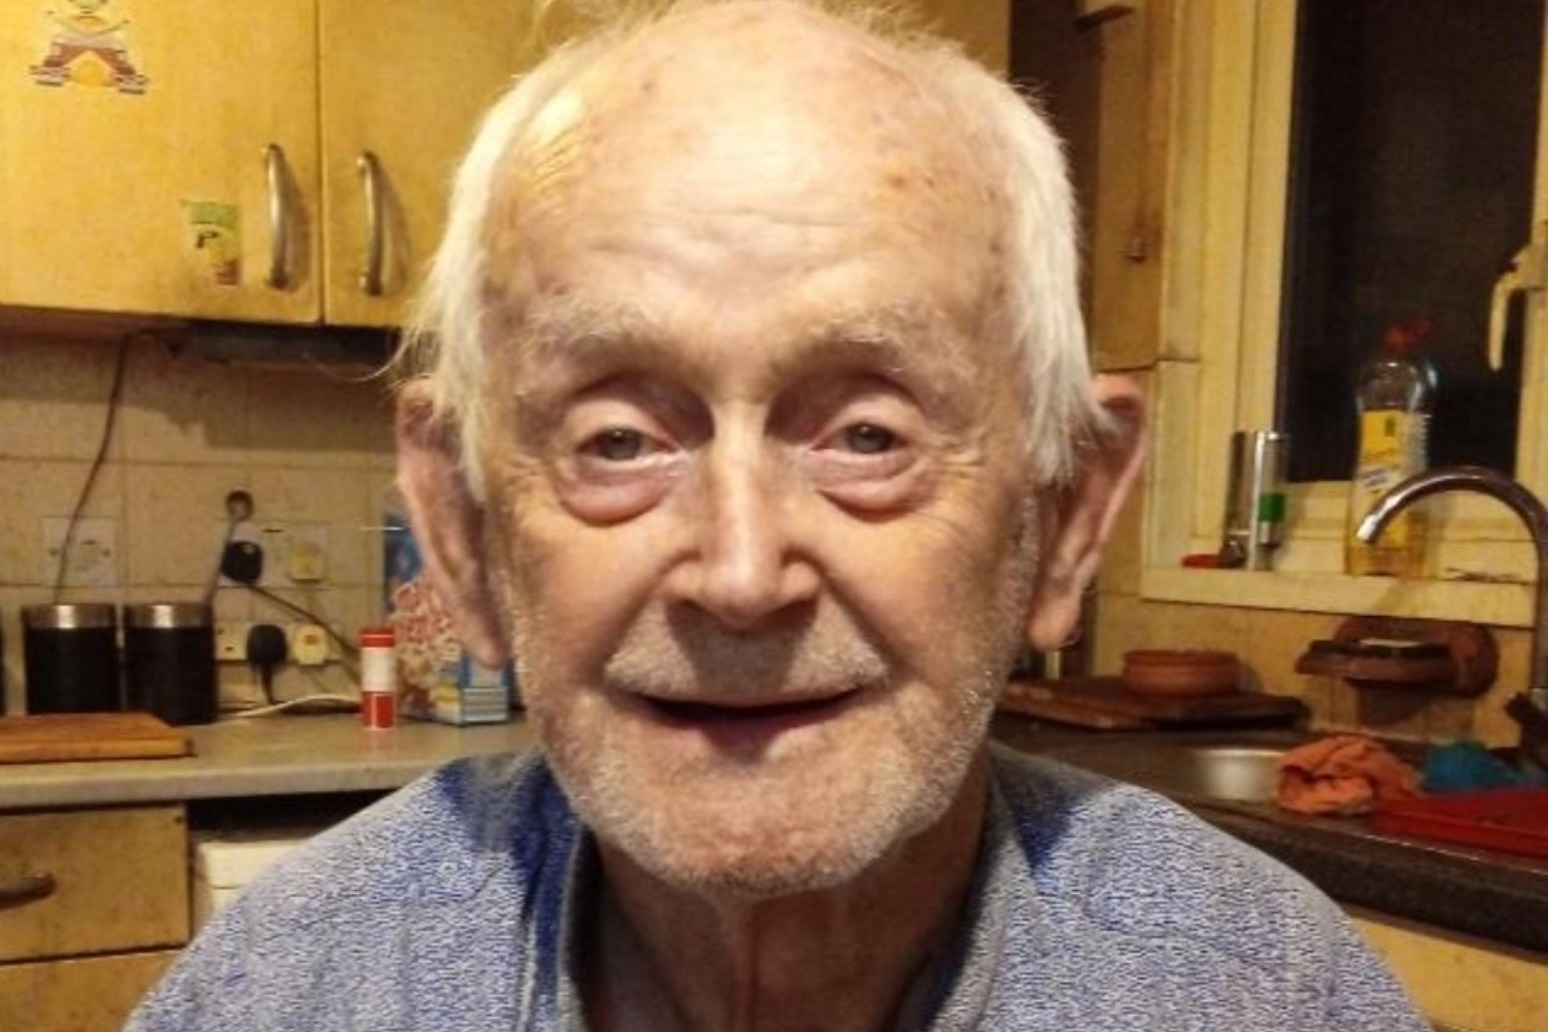 Man 44 Charged With Mobility Scooter Murder Of 87 Year Old Thomas O